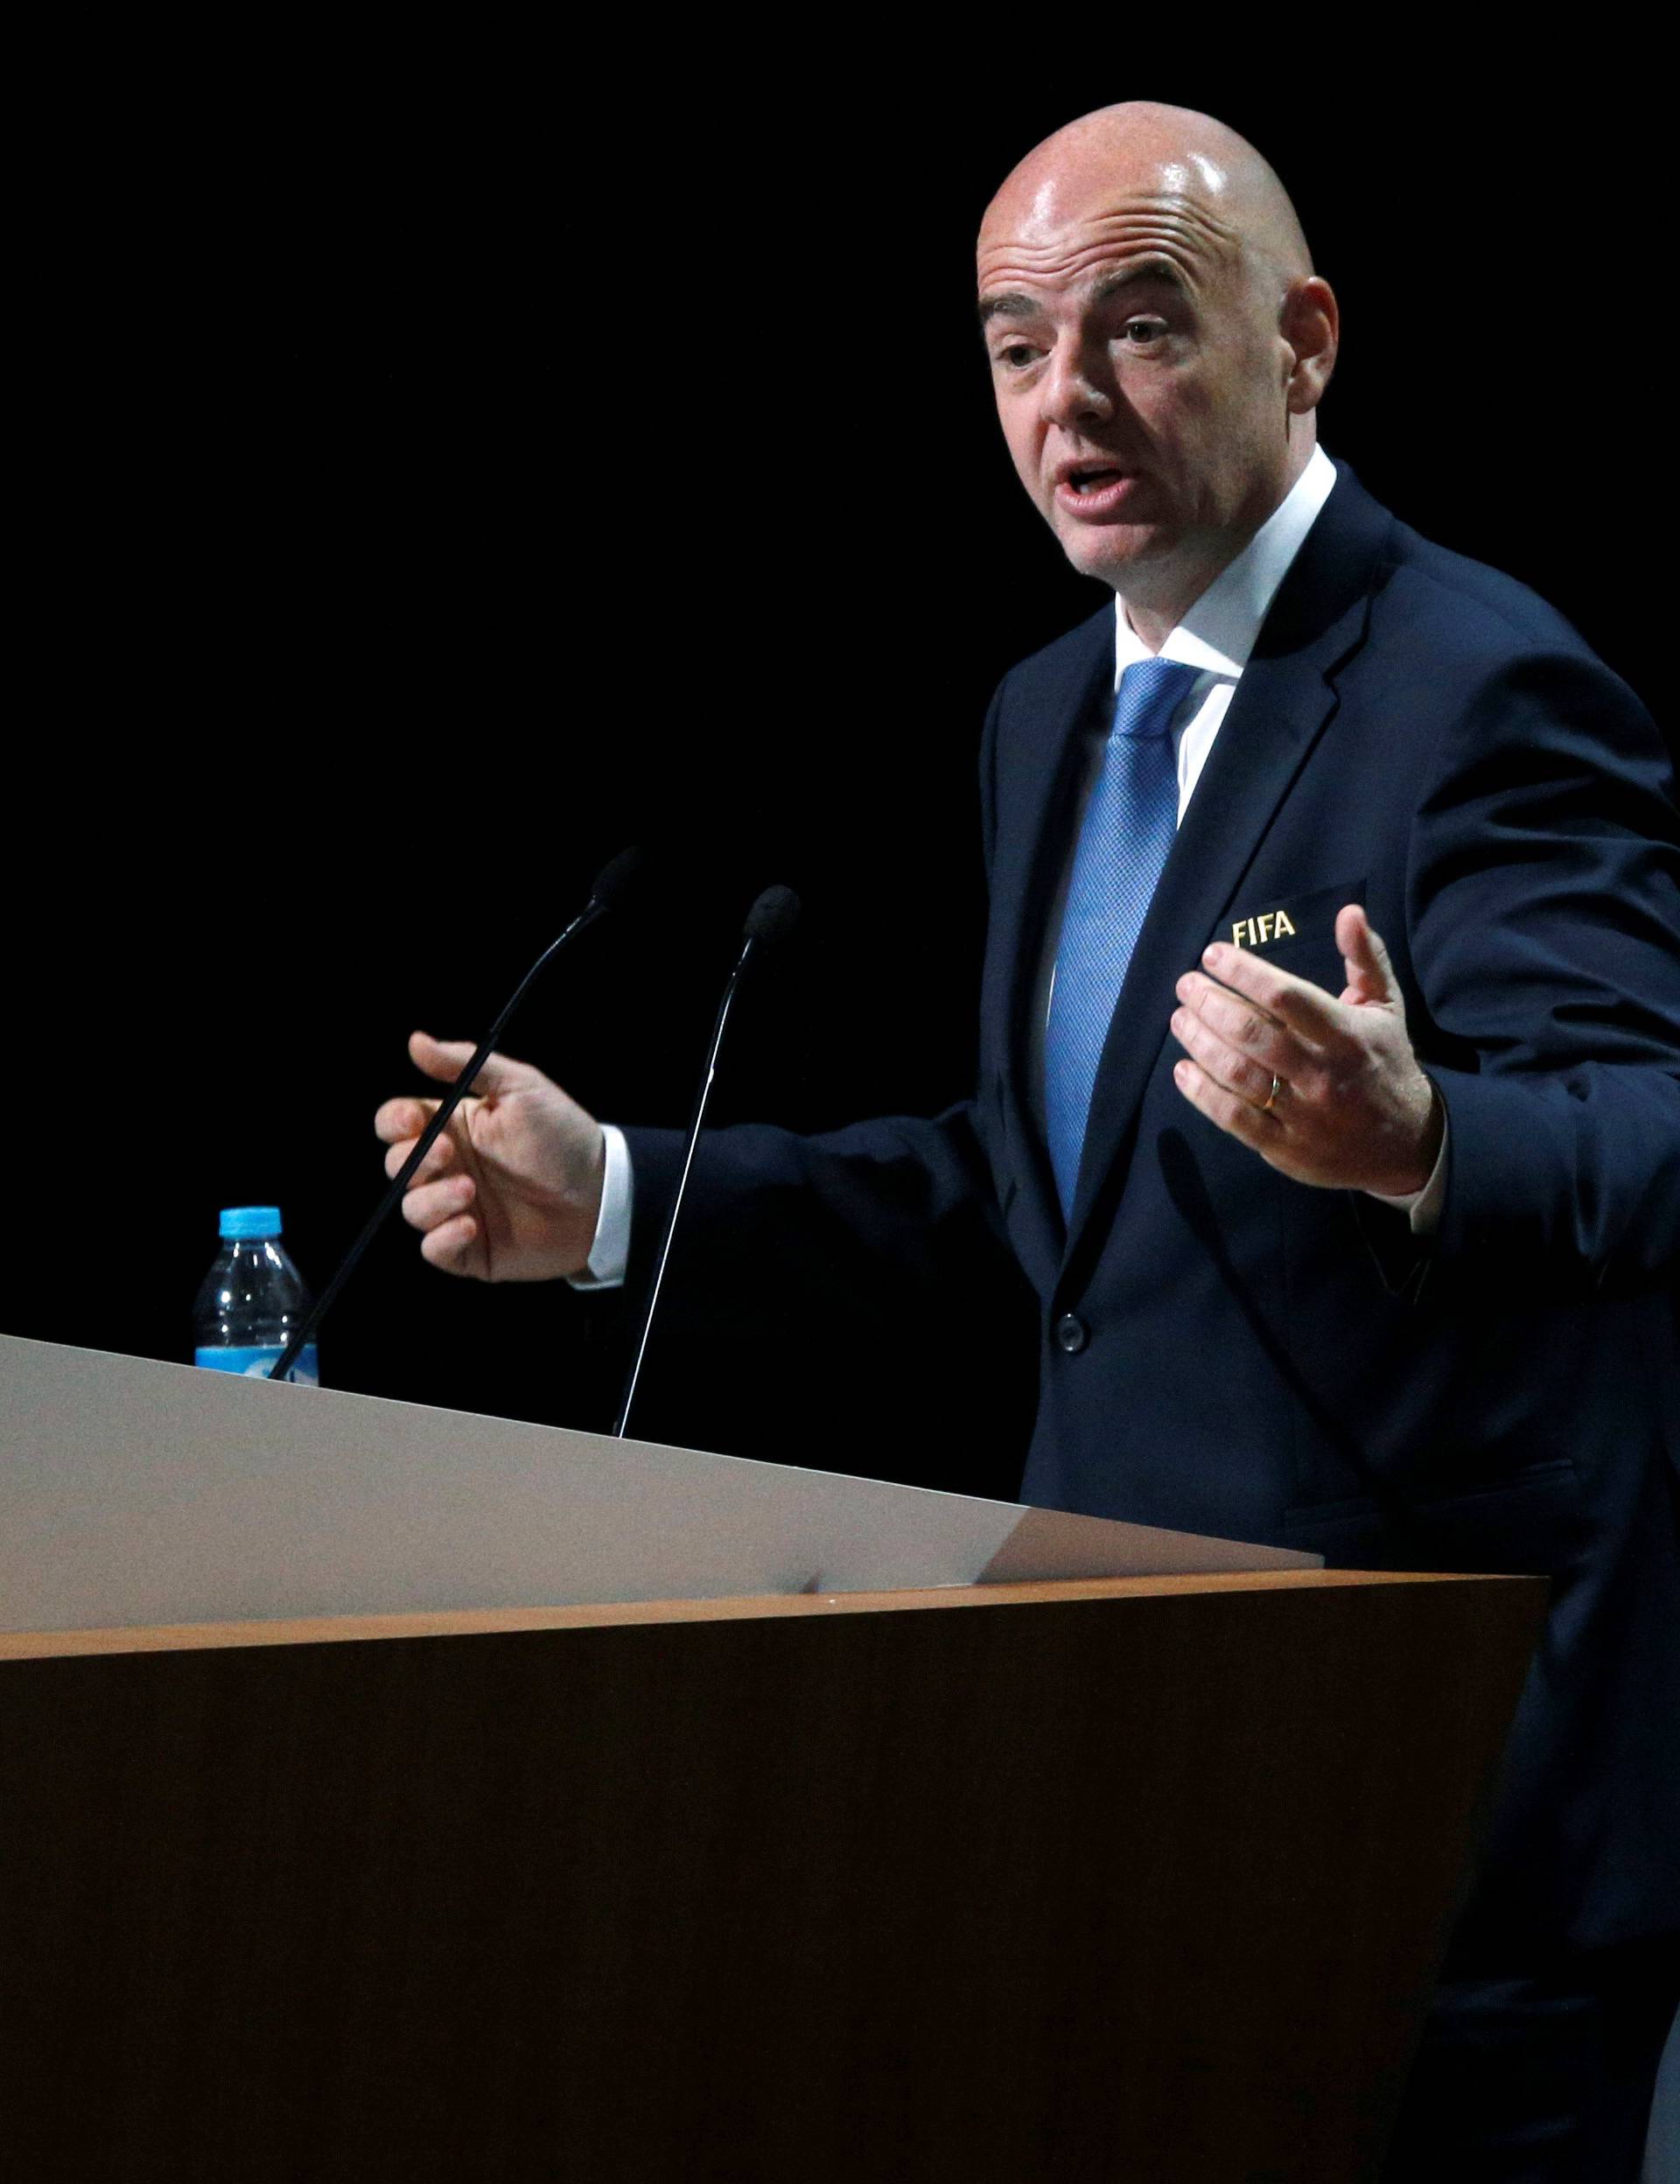 FIFA President Gianni Infantino gives a speech during the 66th FIFA Congress in Mexico City, Mexico